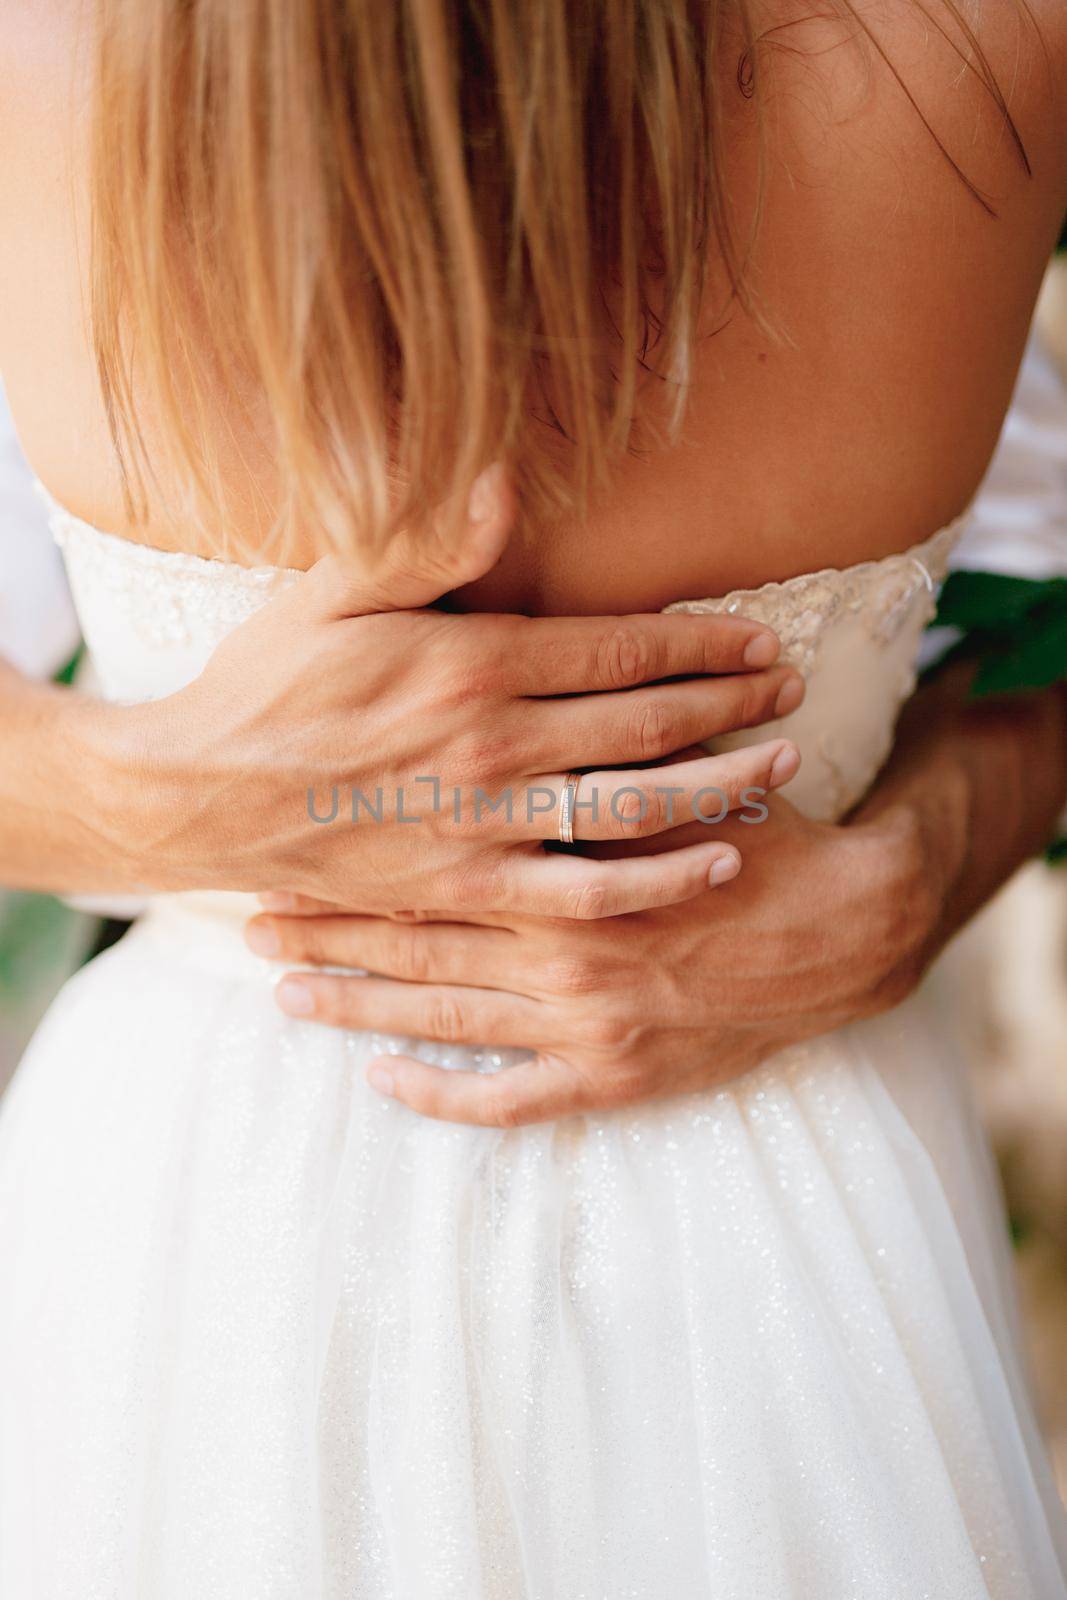 The groom gently hugs the bride and strokes her back with his hands, close-up by Nadtochiy